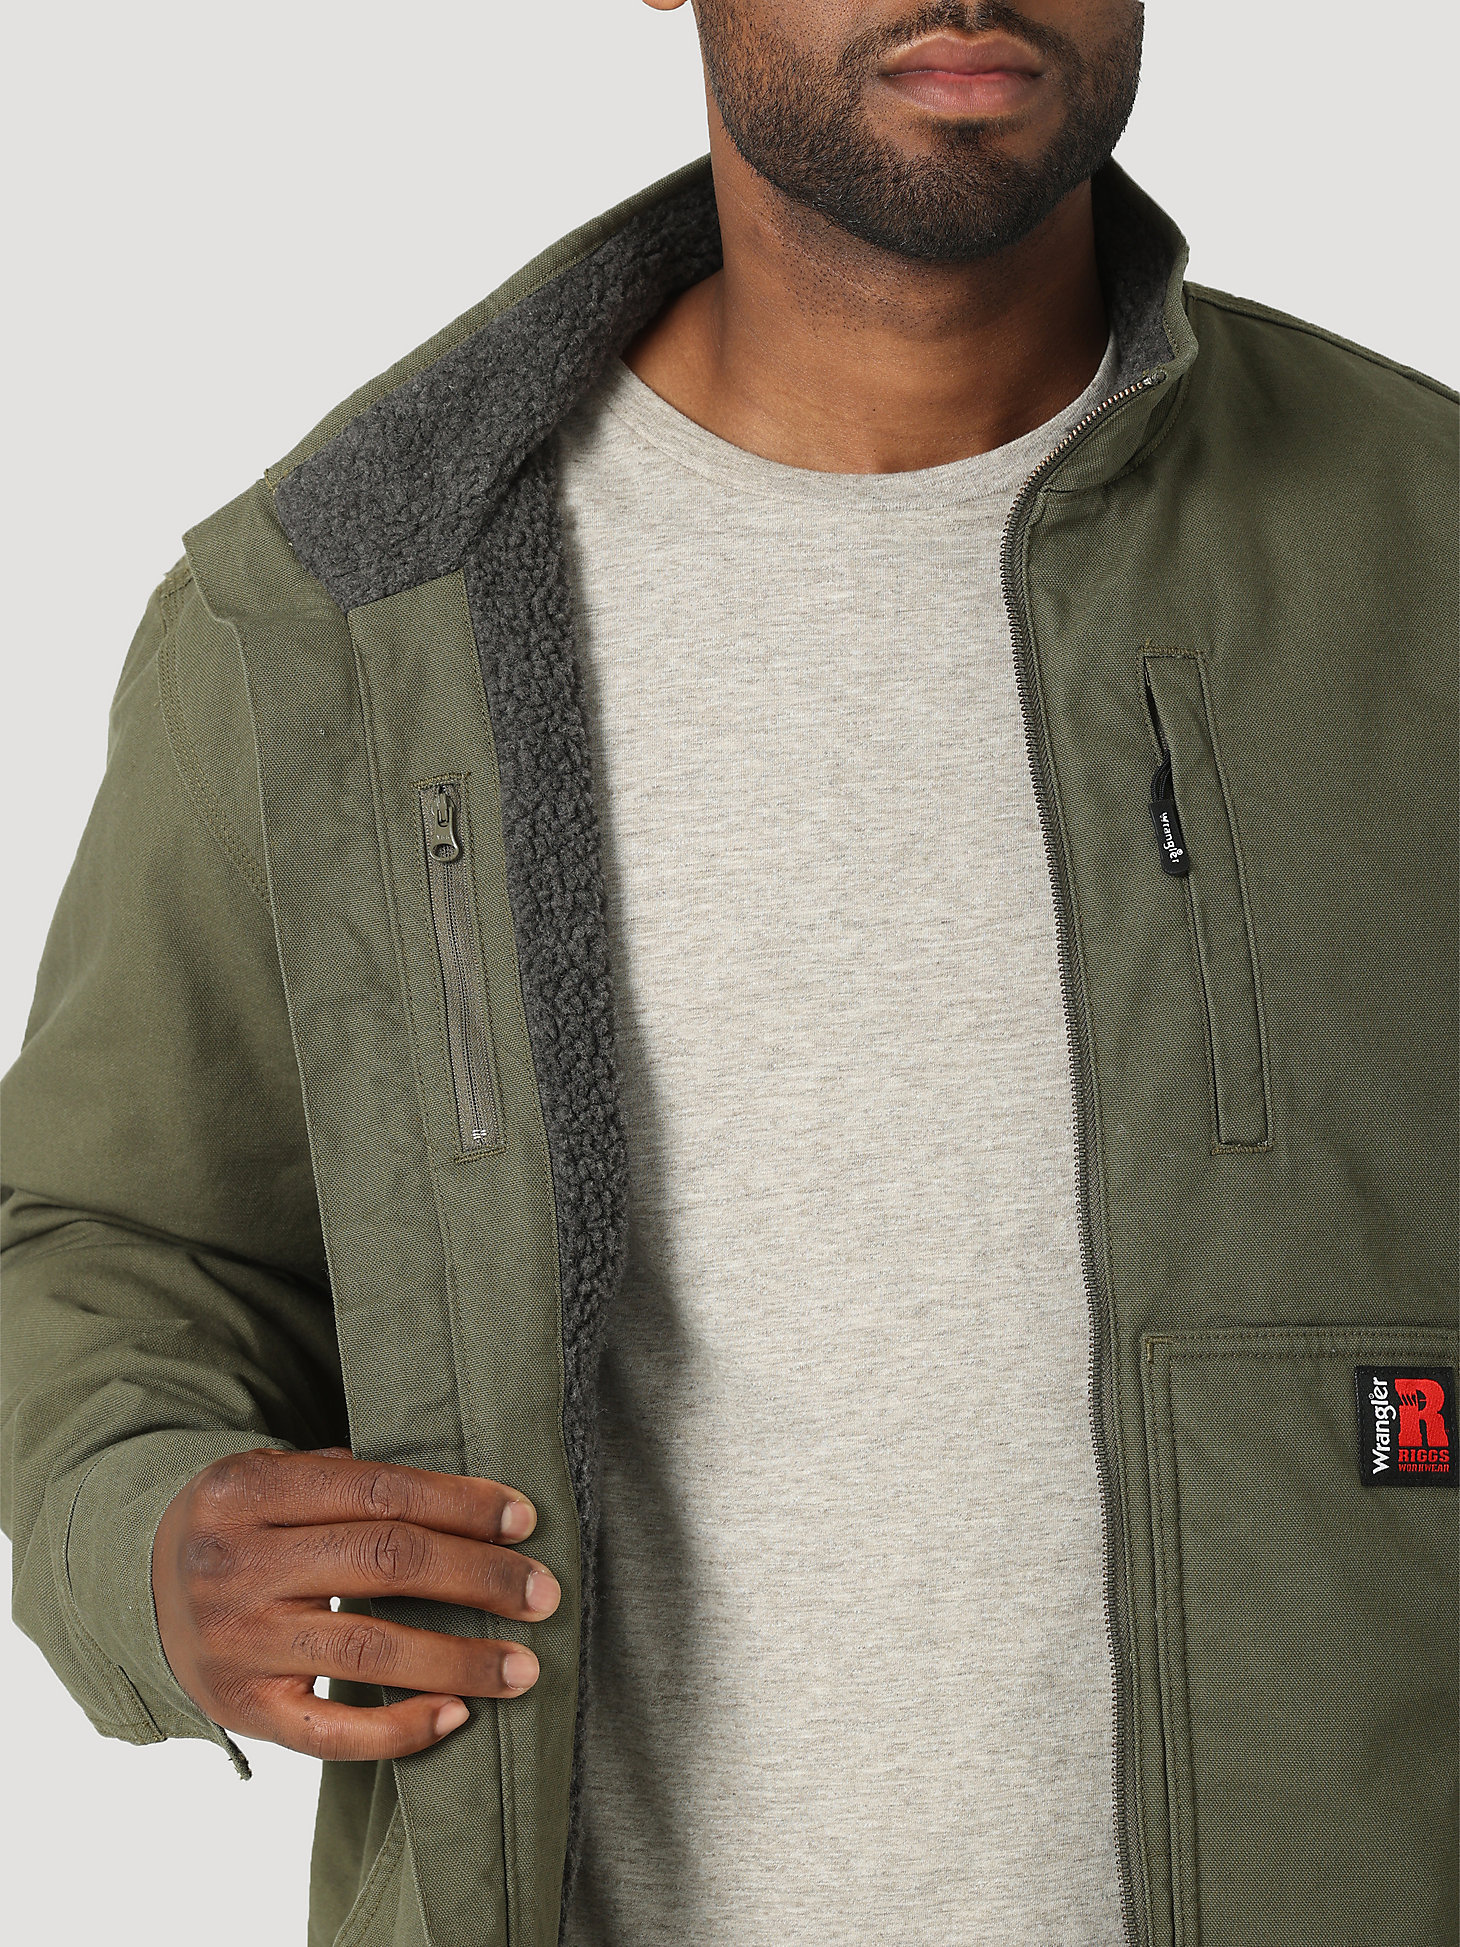 RIGGS Tough Layers Sherpa Lined Canvas Jacket in Loden alternative view 7